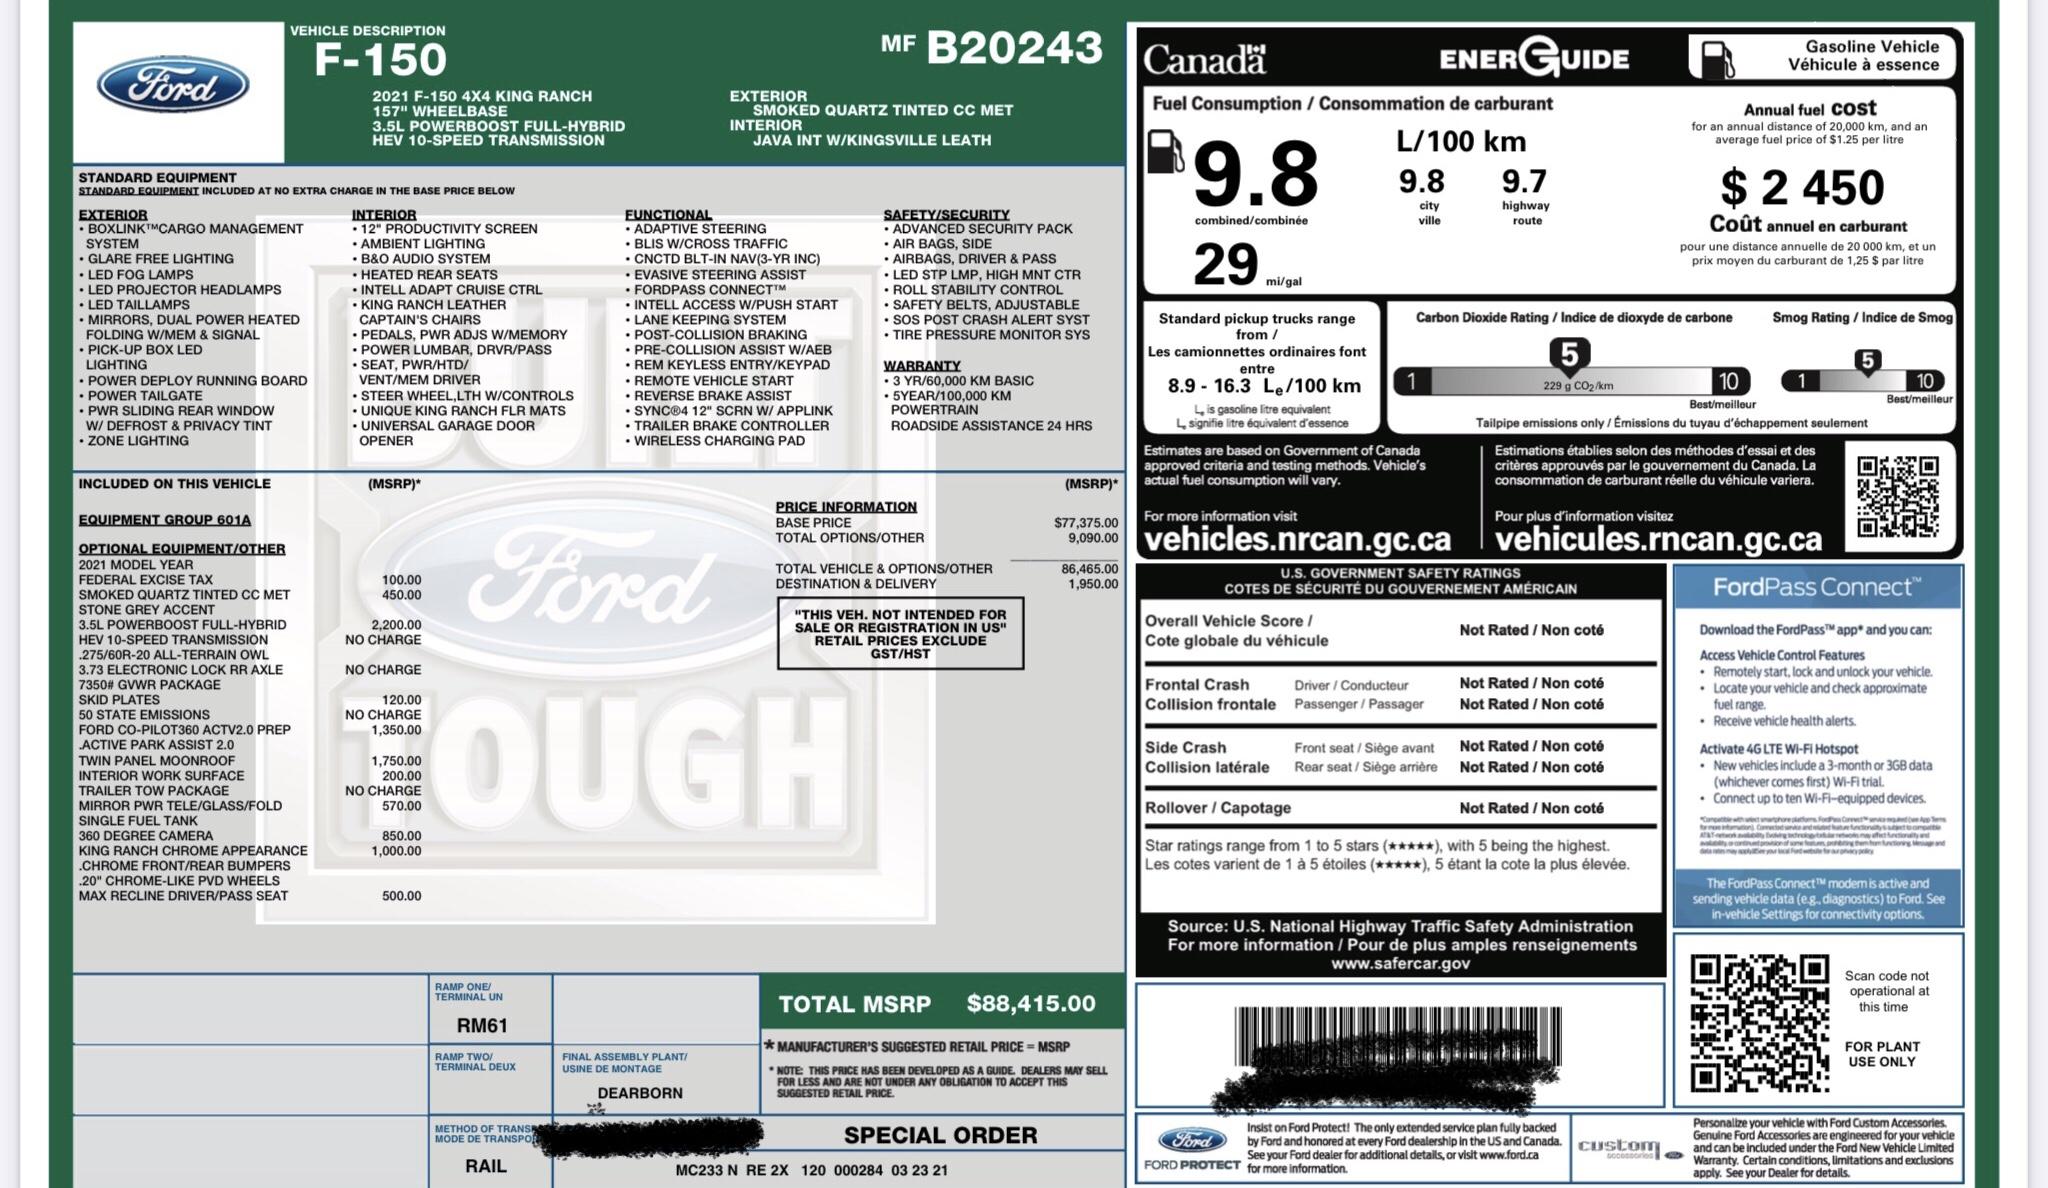 Ford F-150 Lightning 2021 F-150 Payload Stickers EF90B034-6745-4313-82A0-FCC1D0E005E4